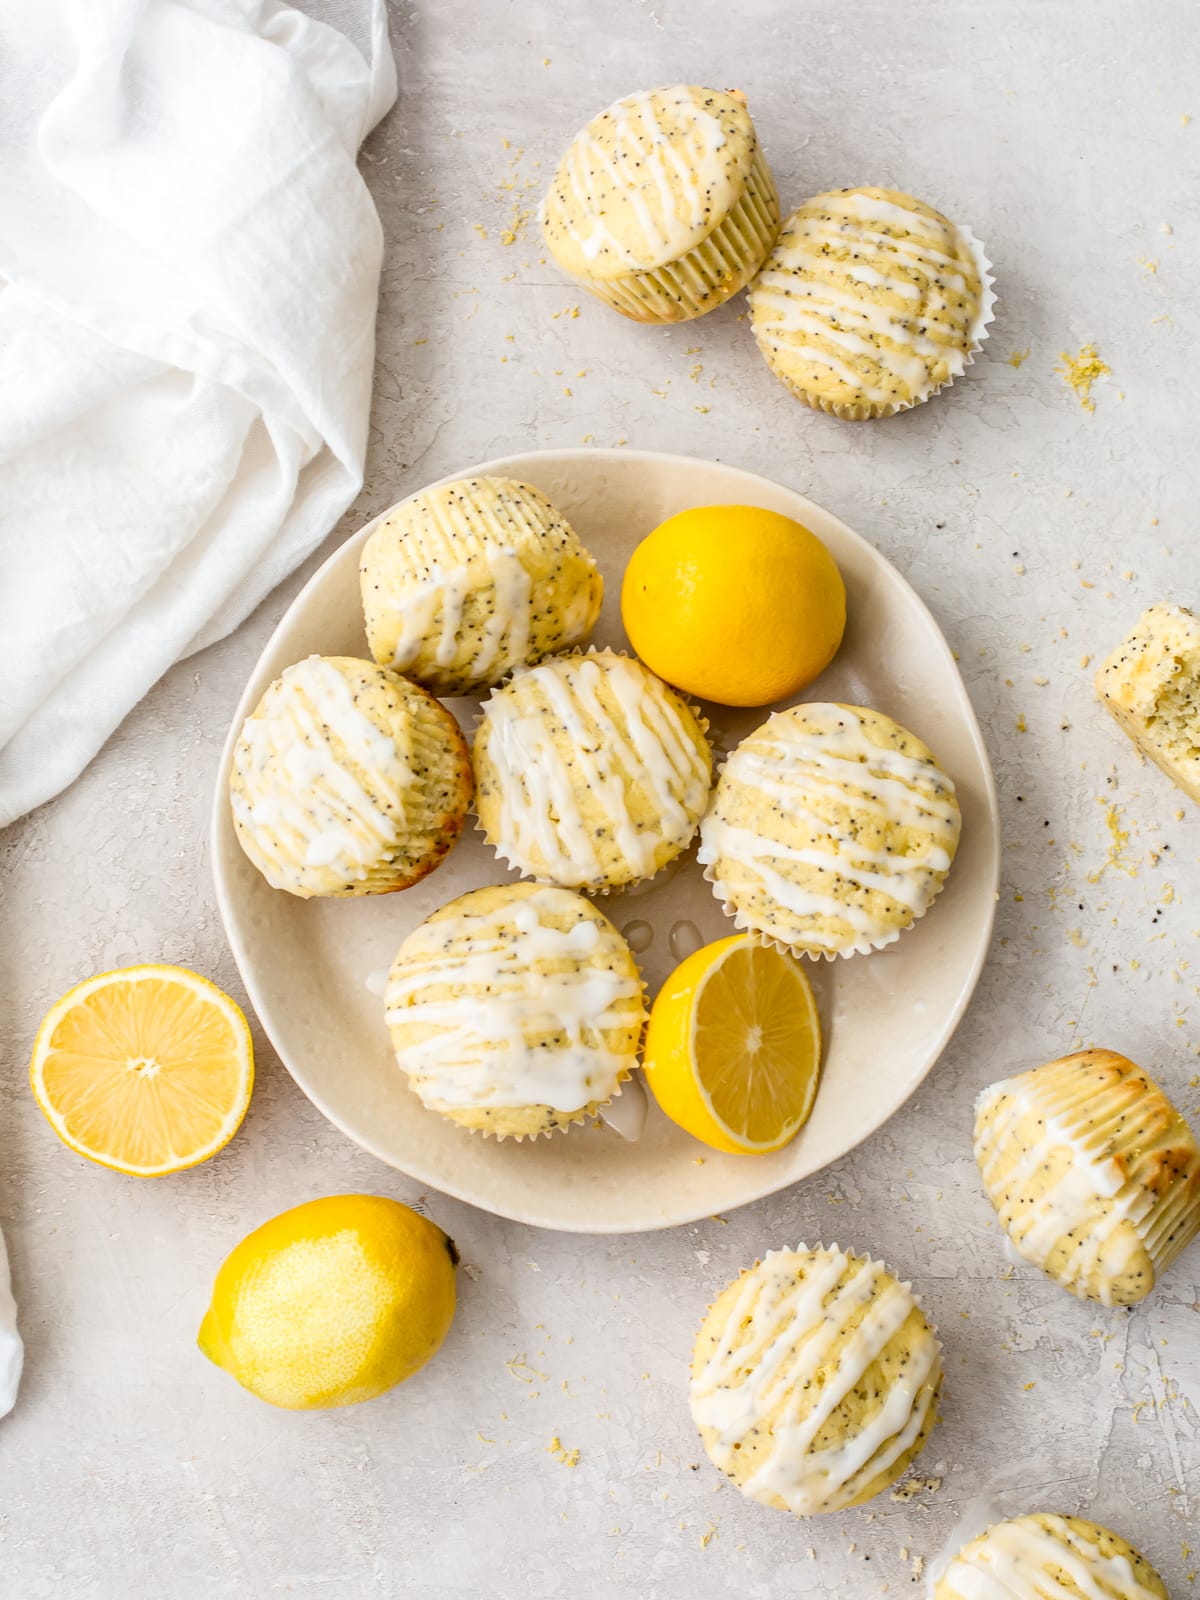 lemon poppy seed muffins and lemon wedges on a plate and table surface